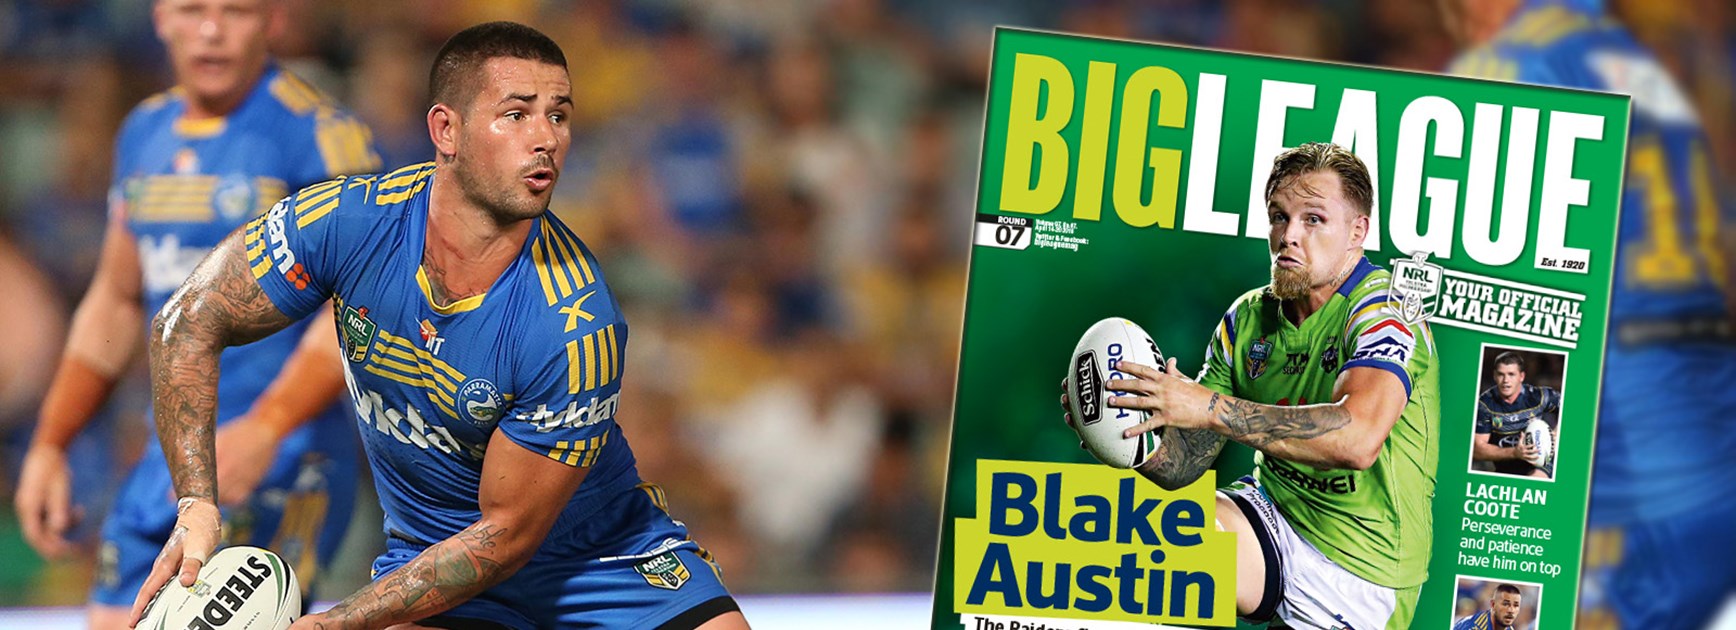 Nathan Peats should be the next NSW hooker according to former Origin great Danny Buderus.